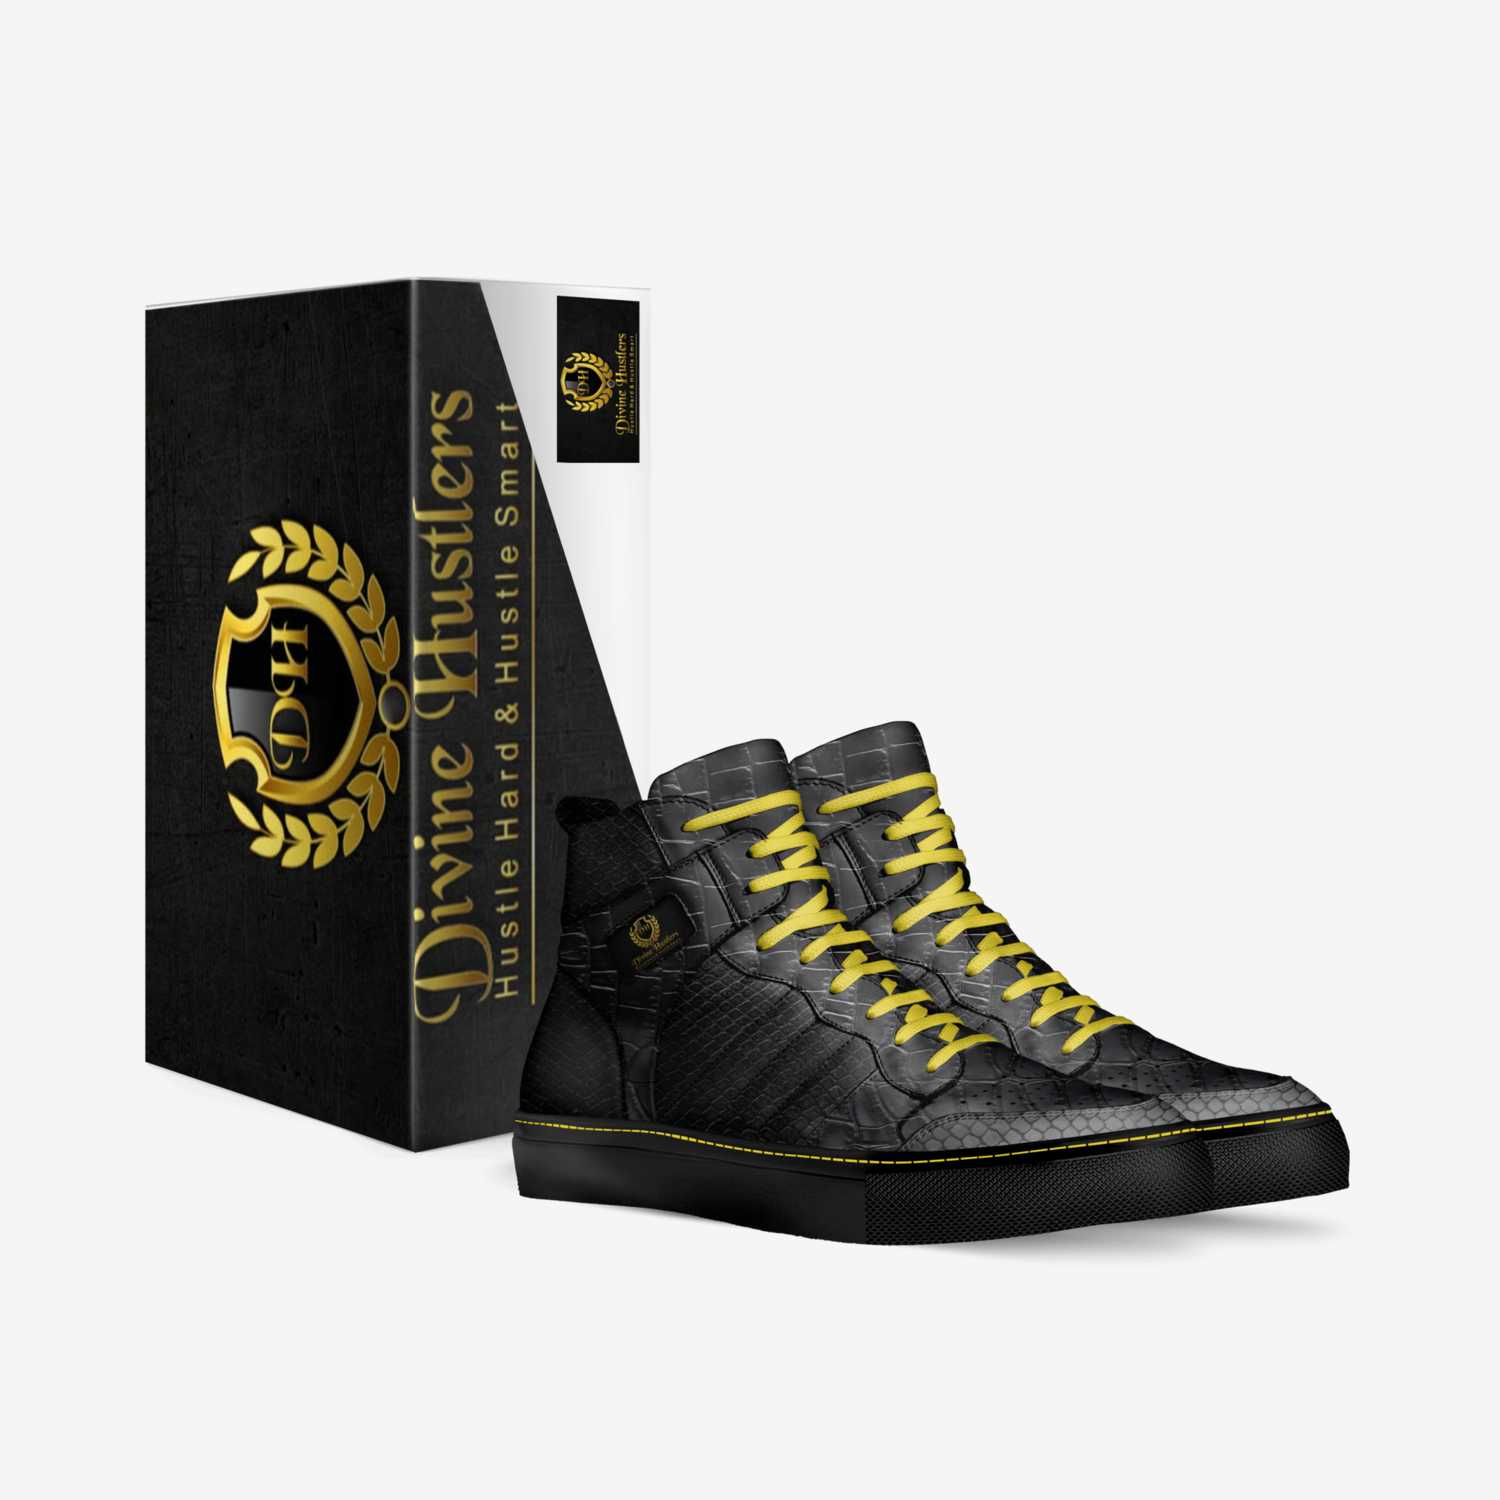 DH3s custom made in Italy shoes by Jermaine Walker | Box view